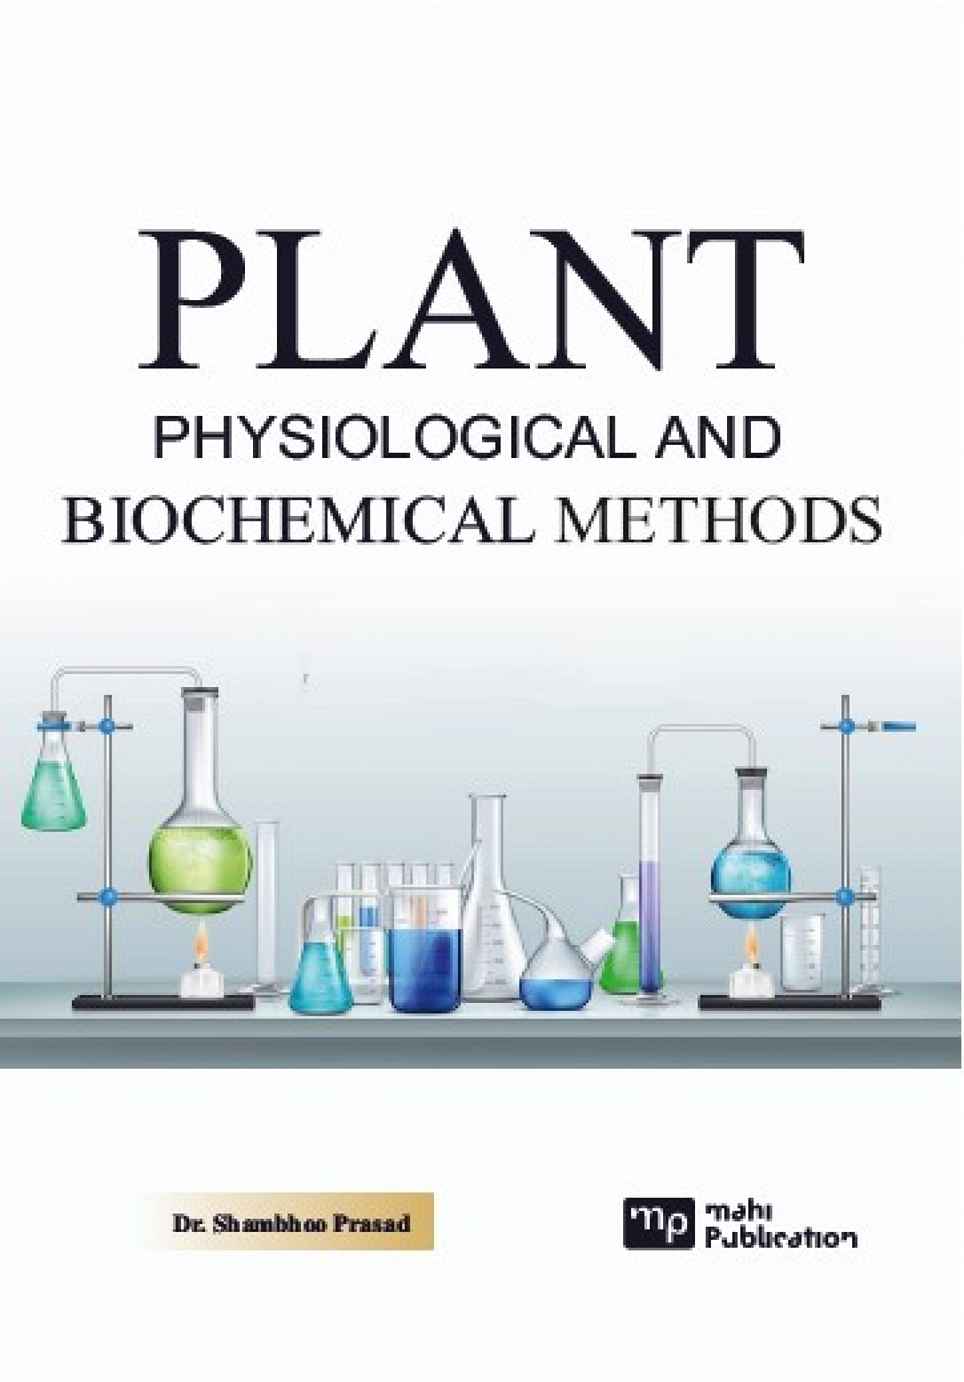 Plant Physiological and Biochemical Methods